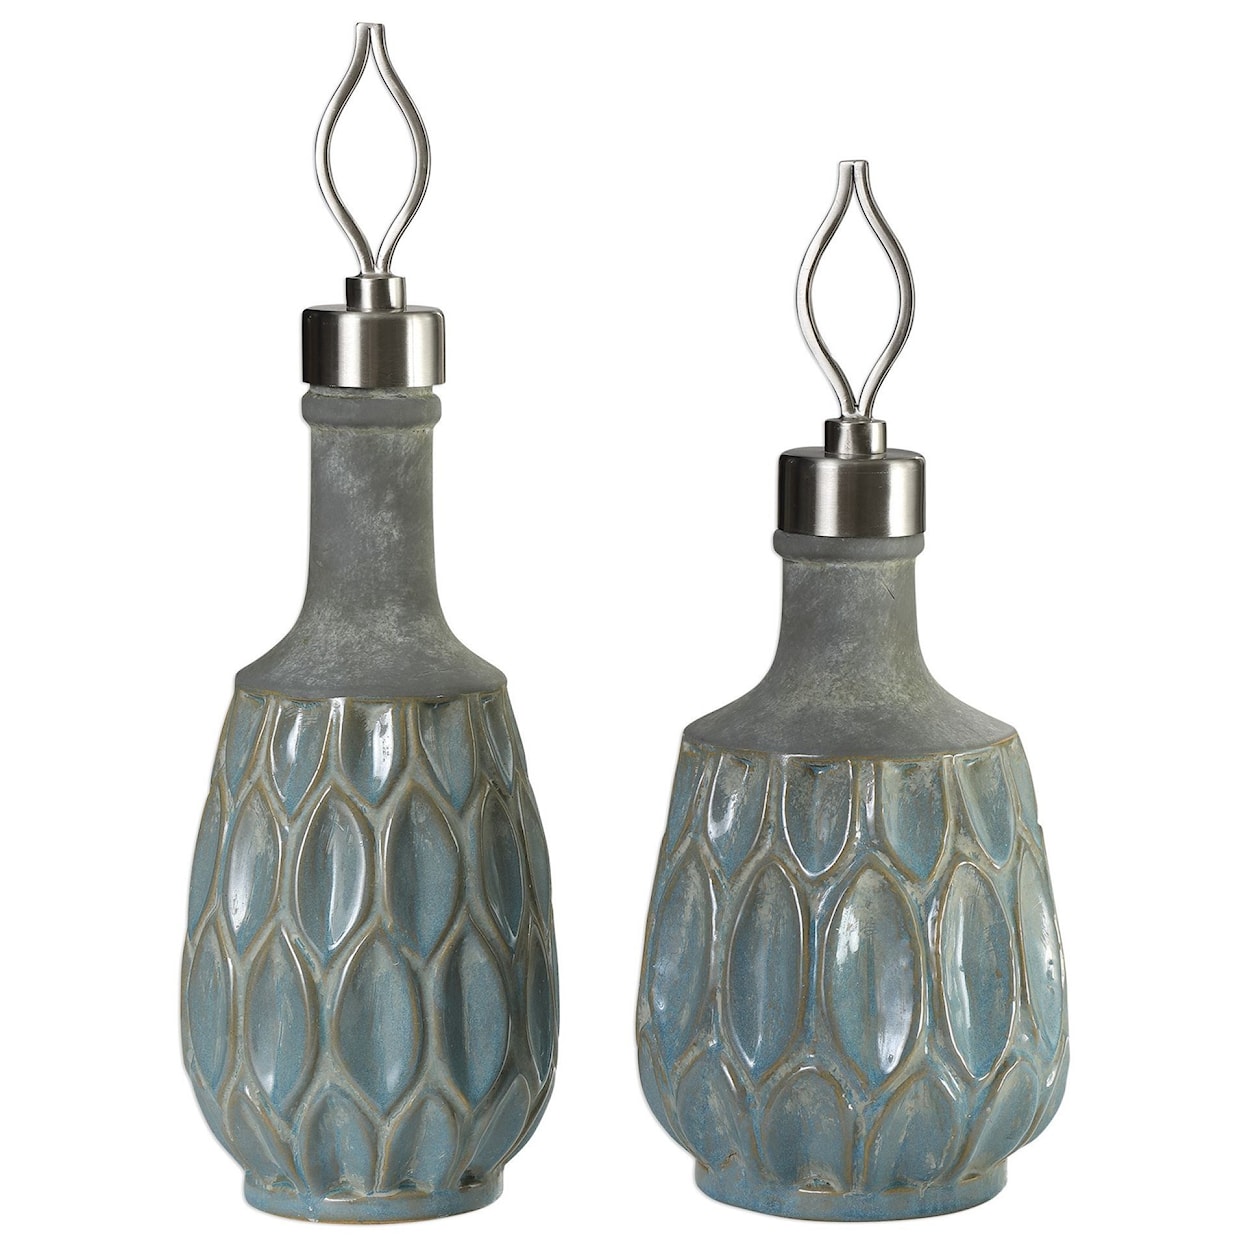 Uttermost Accessories Arpana Blue And Gray Bottles S/2